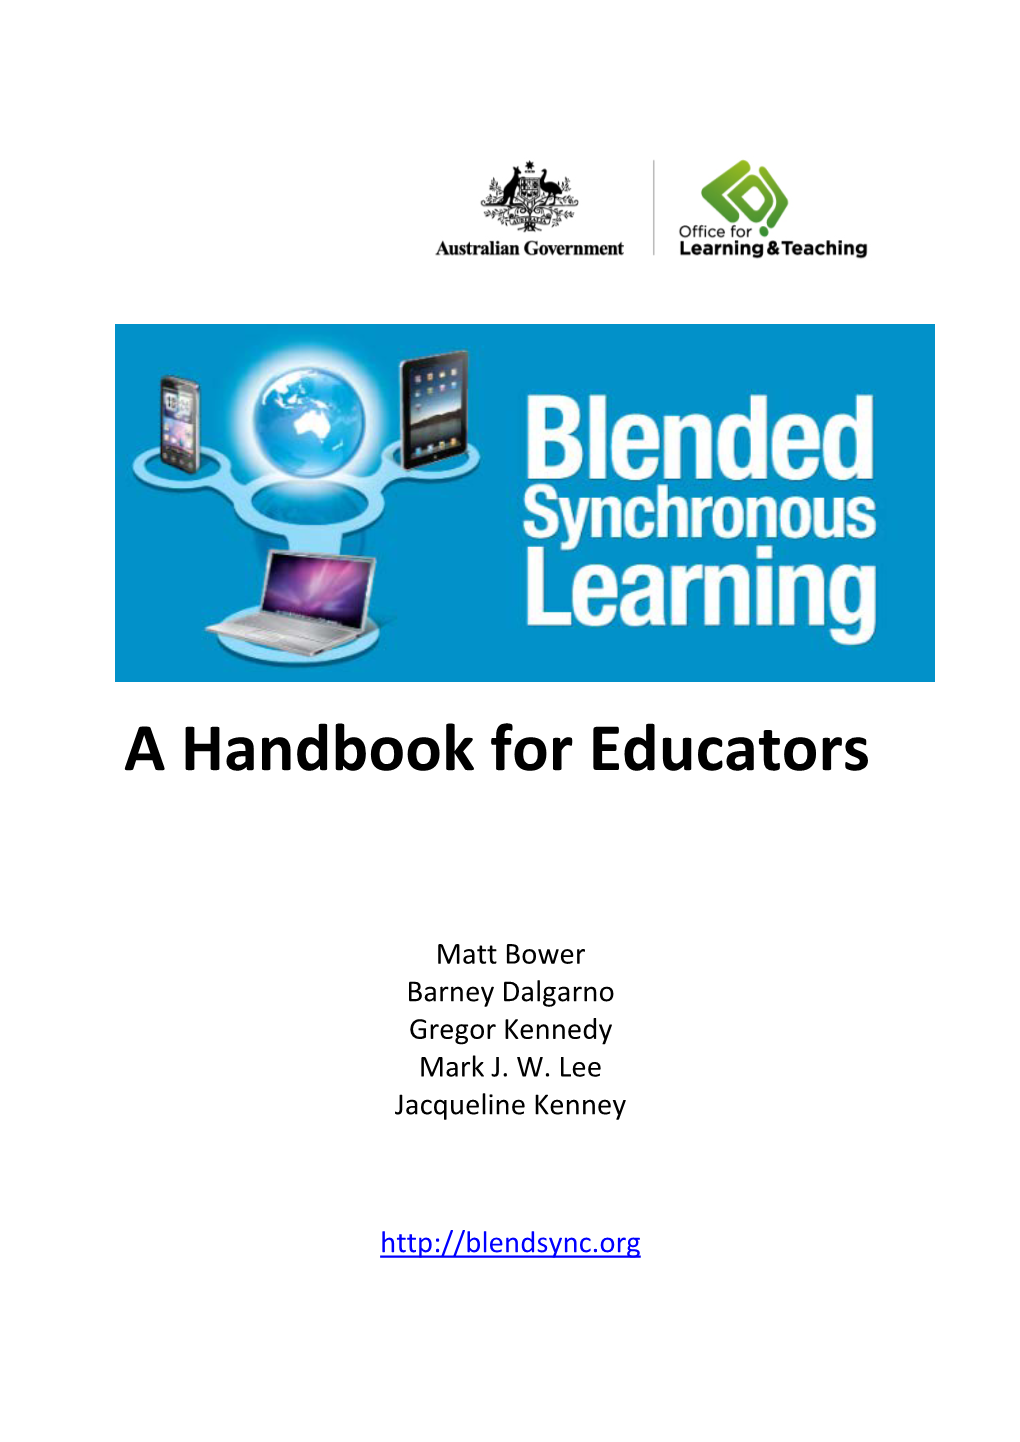 Blended Synchronous Learning: a Handbook for Educators 2